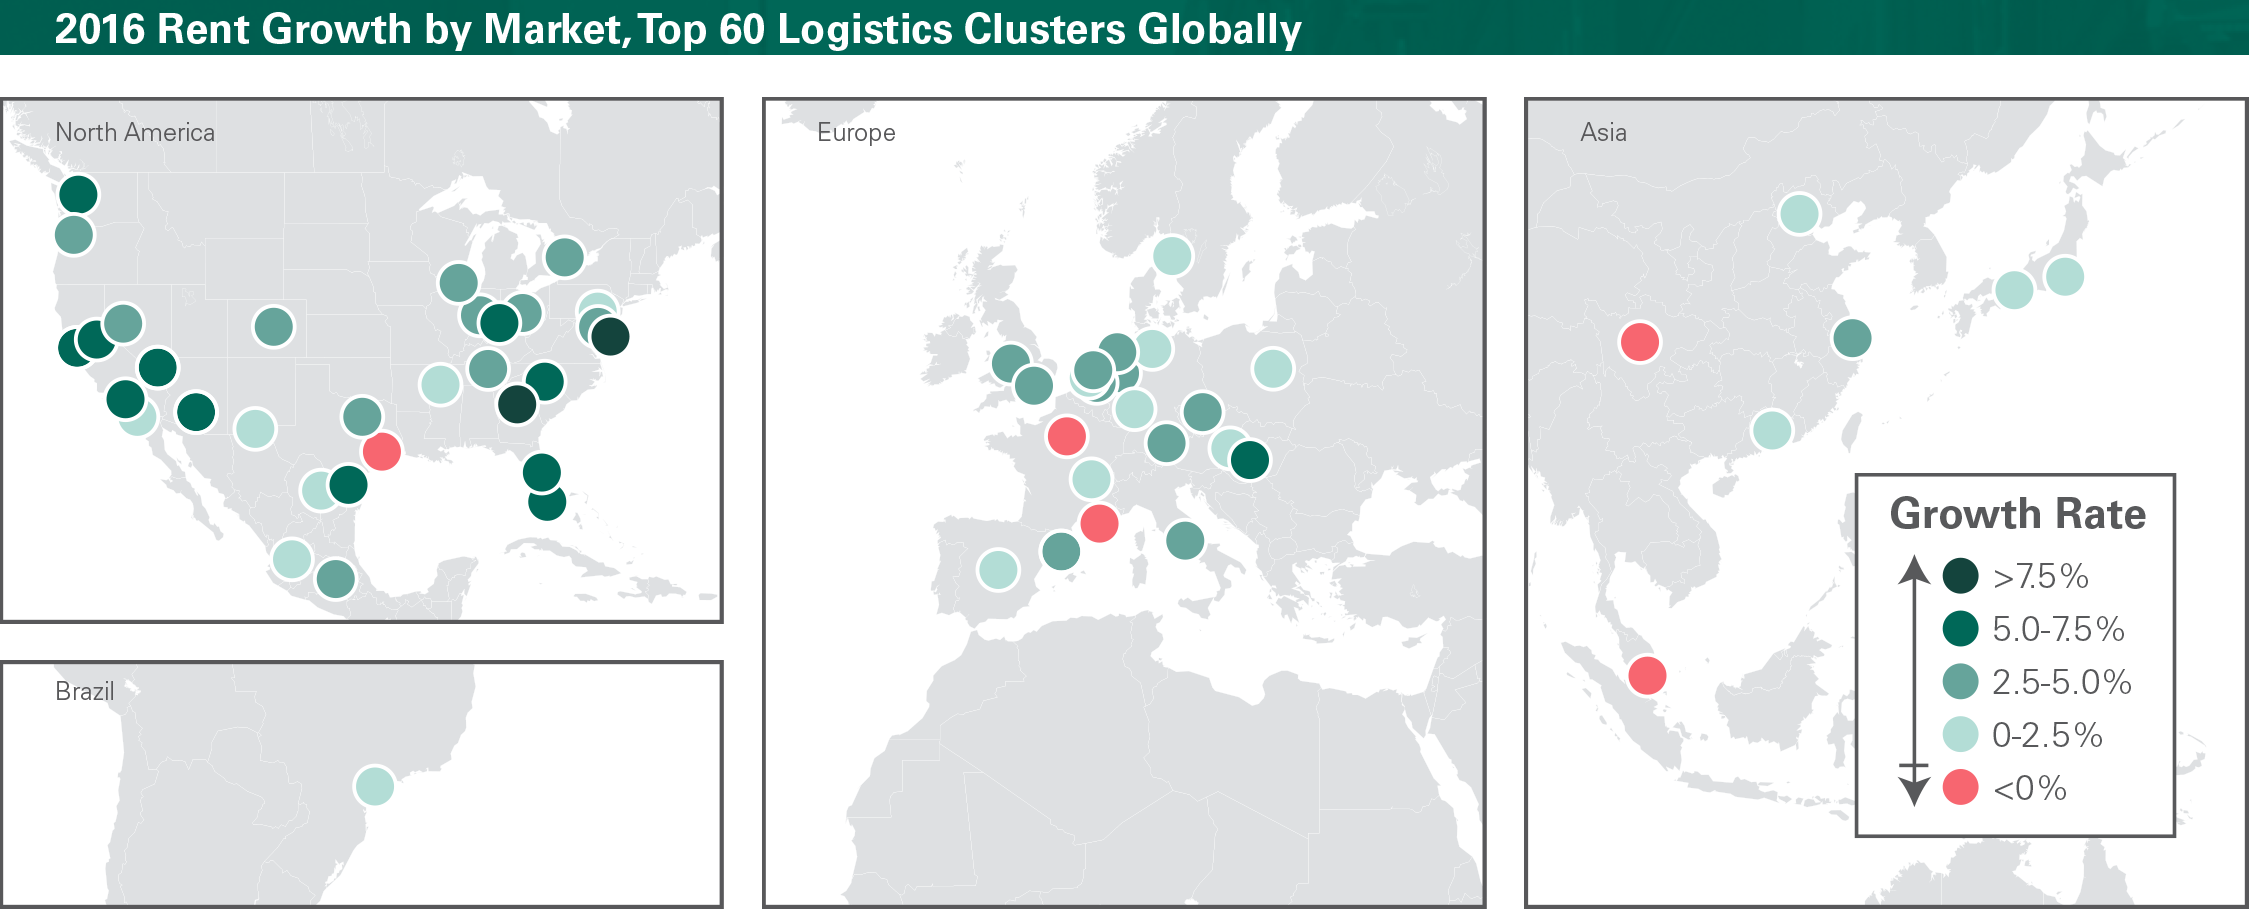 2016 Rent Growth by Market, Top 60 Logistics Clusters Globally